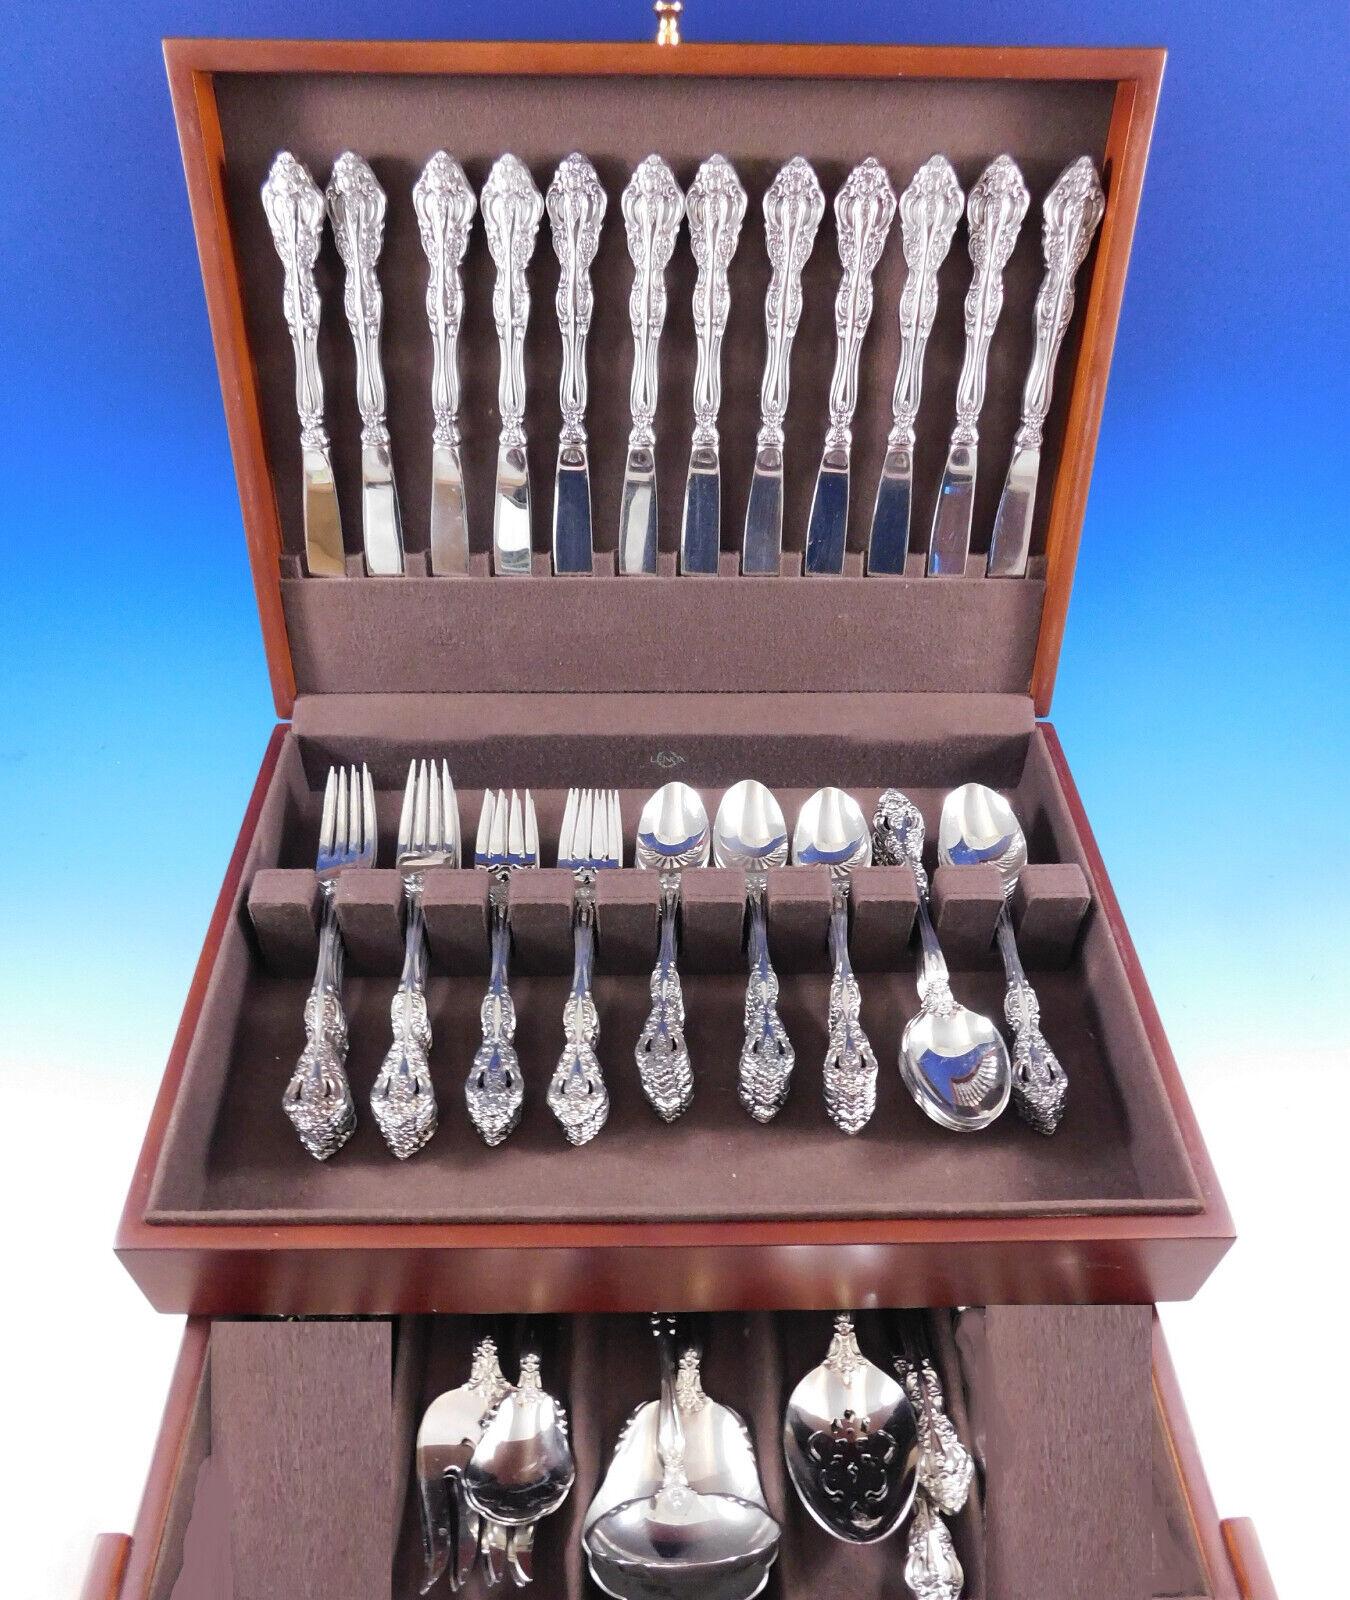 Best seller! Michelangelo by Oneida estate stainless steel flatware set, 84 pieces. This set includes:

12 knives, 9